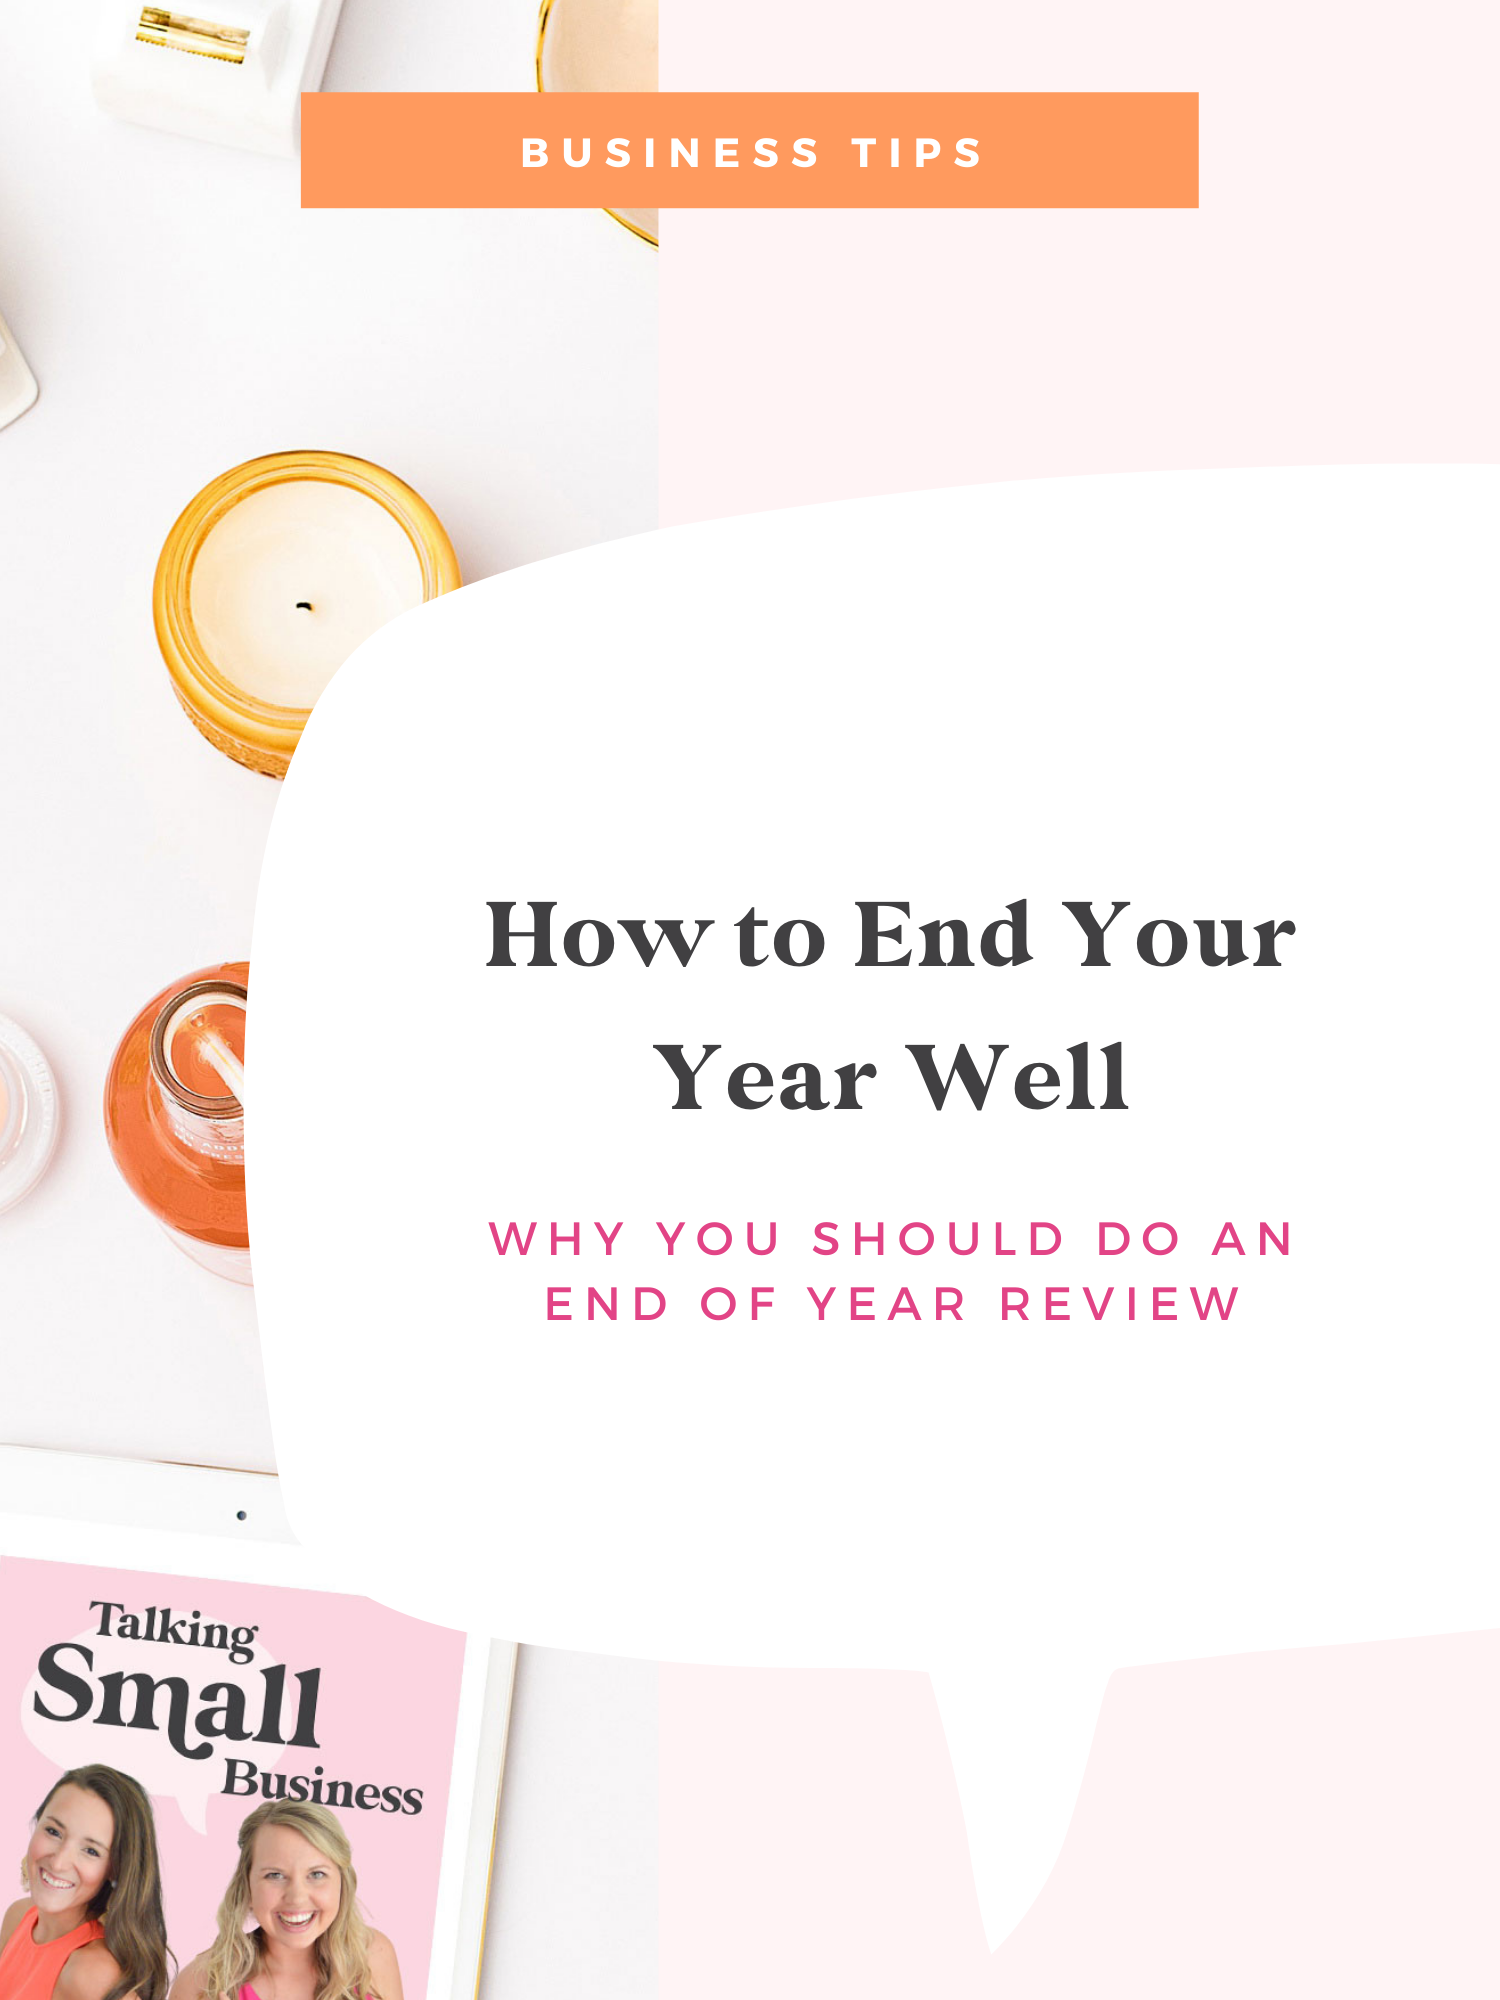 How to End Your Year Well: Doing an End of Year Review, tips from Kat Schmoyer on the Talking Small Business Podcast - and free worksheet